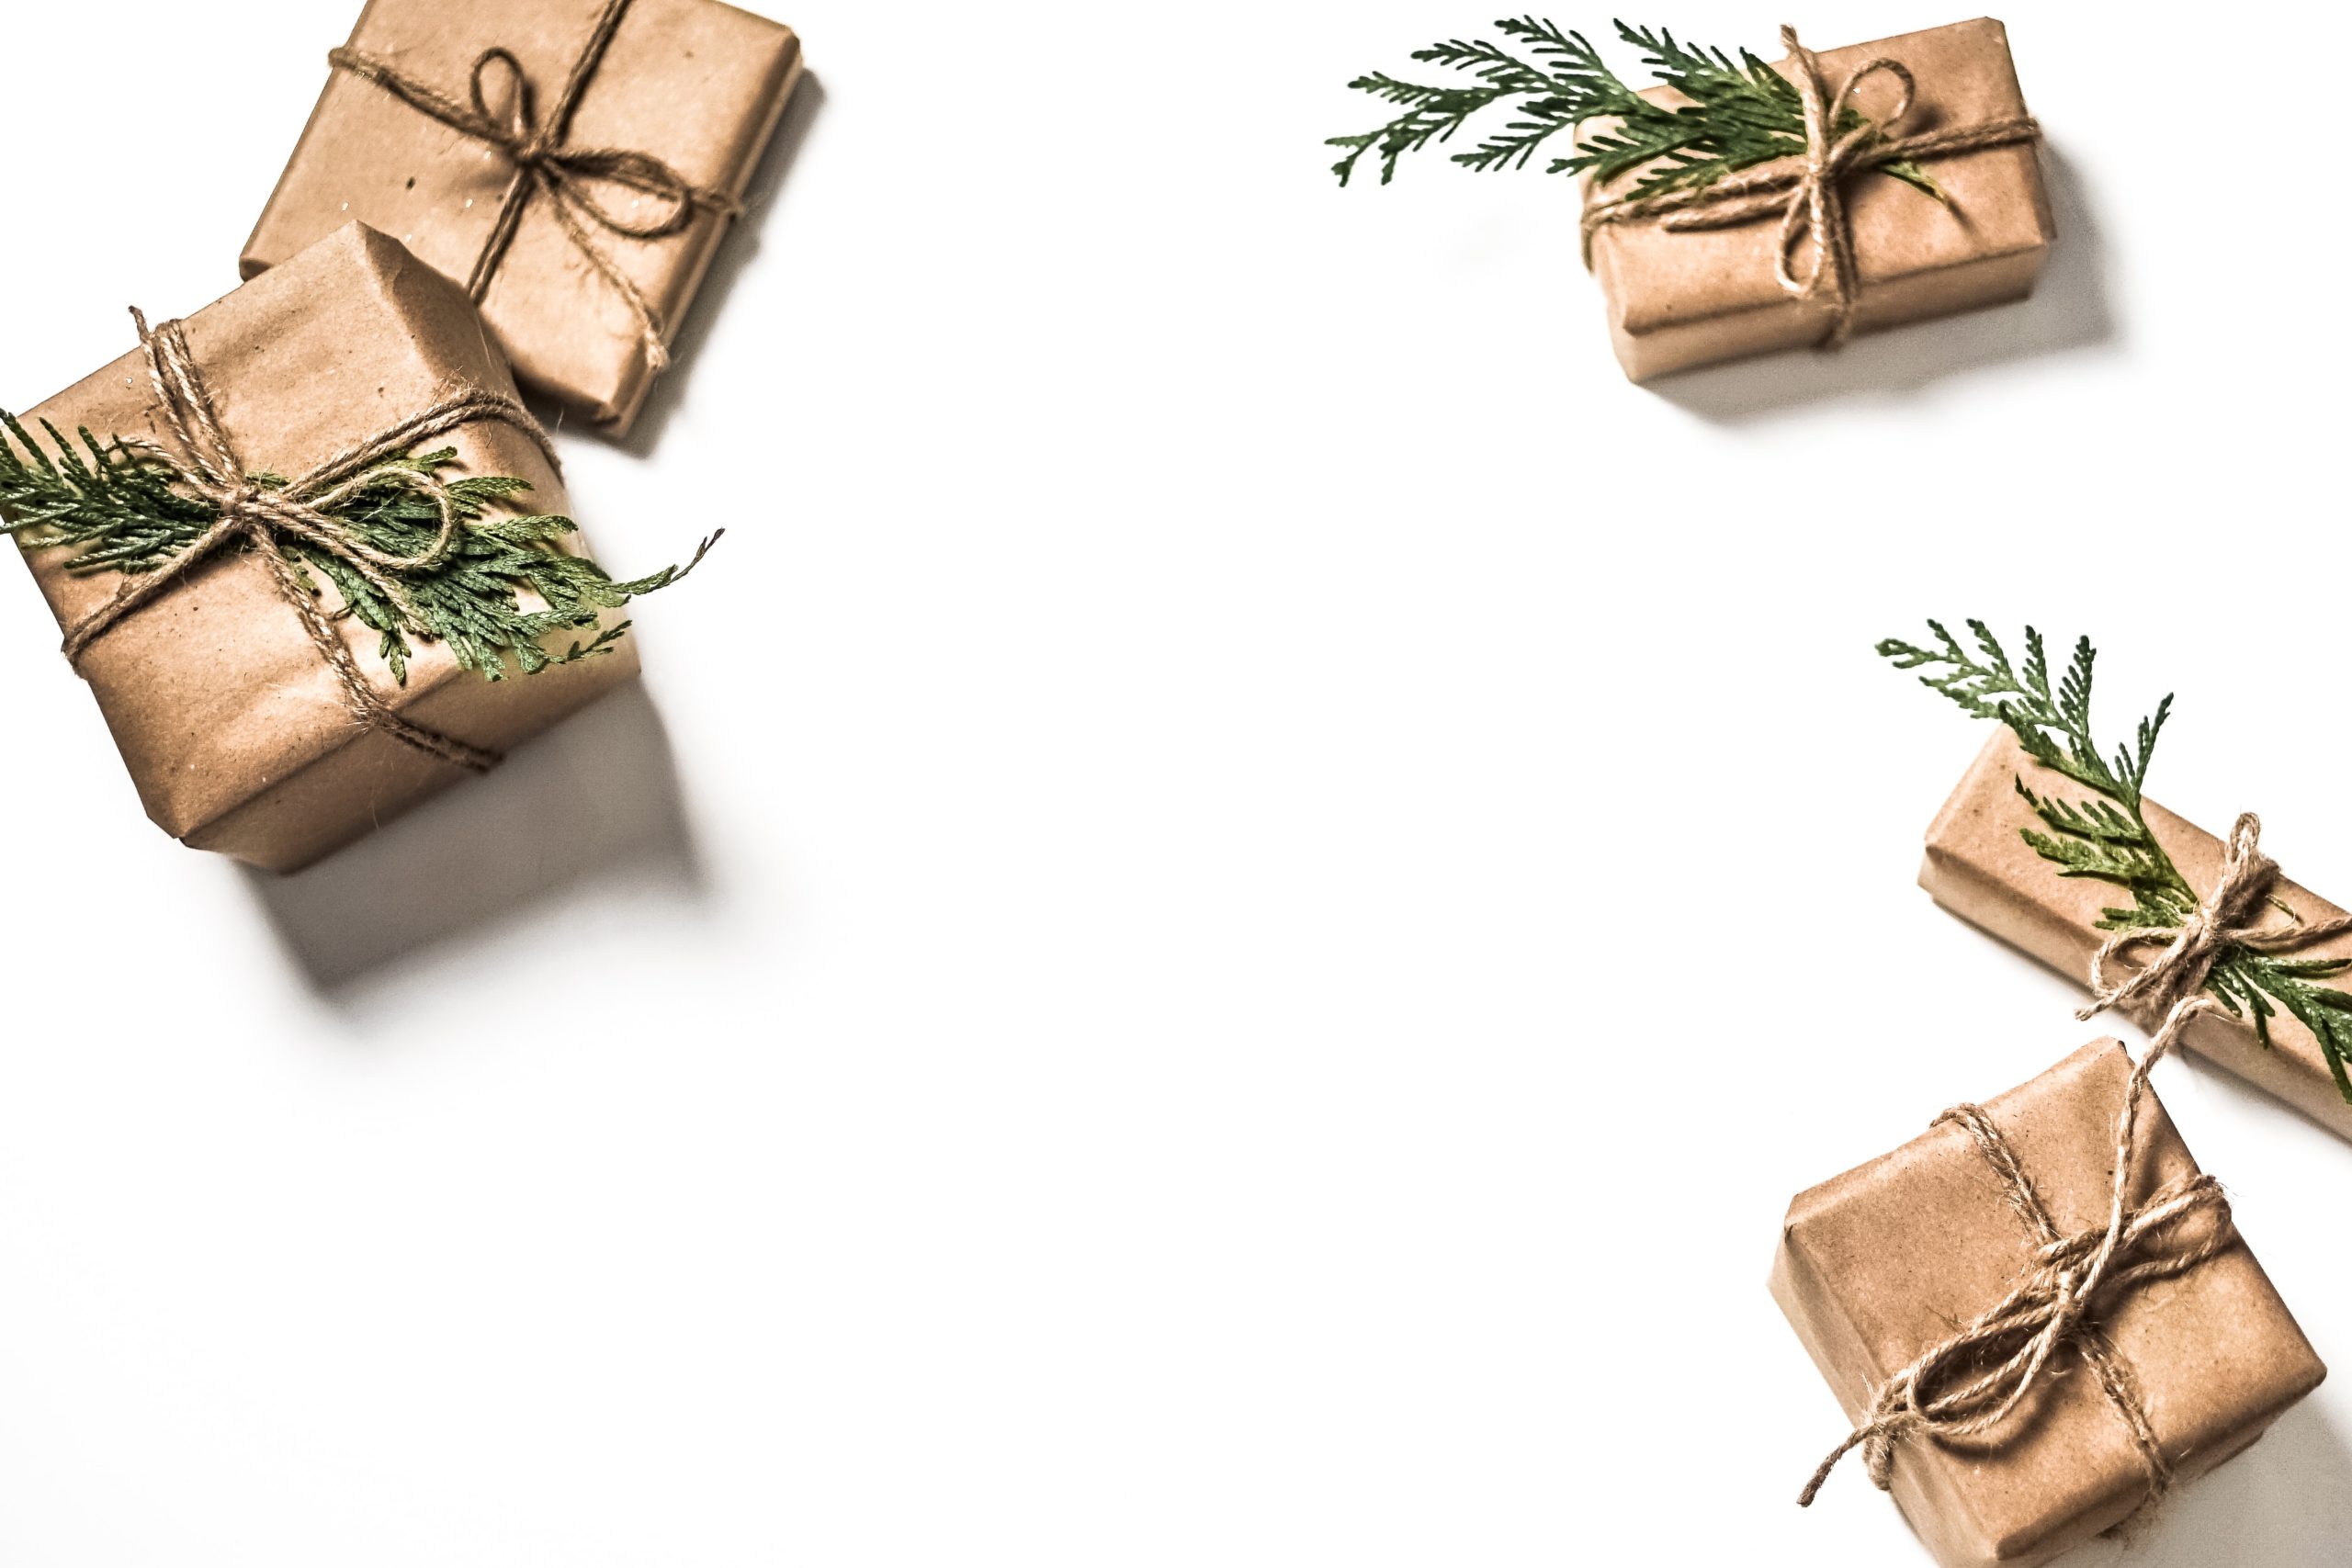 How To Support Small Businesses This Holiday Season